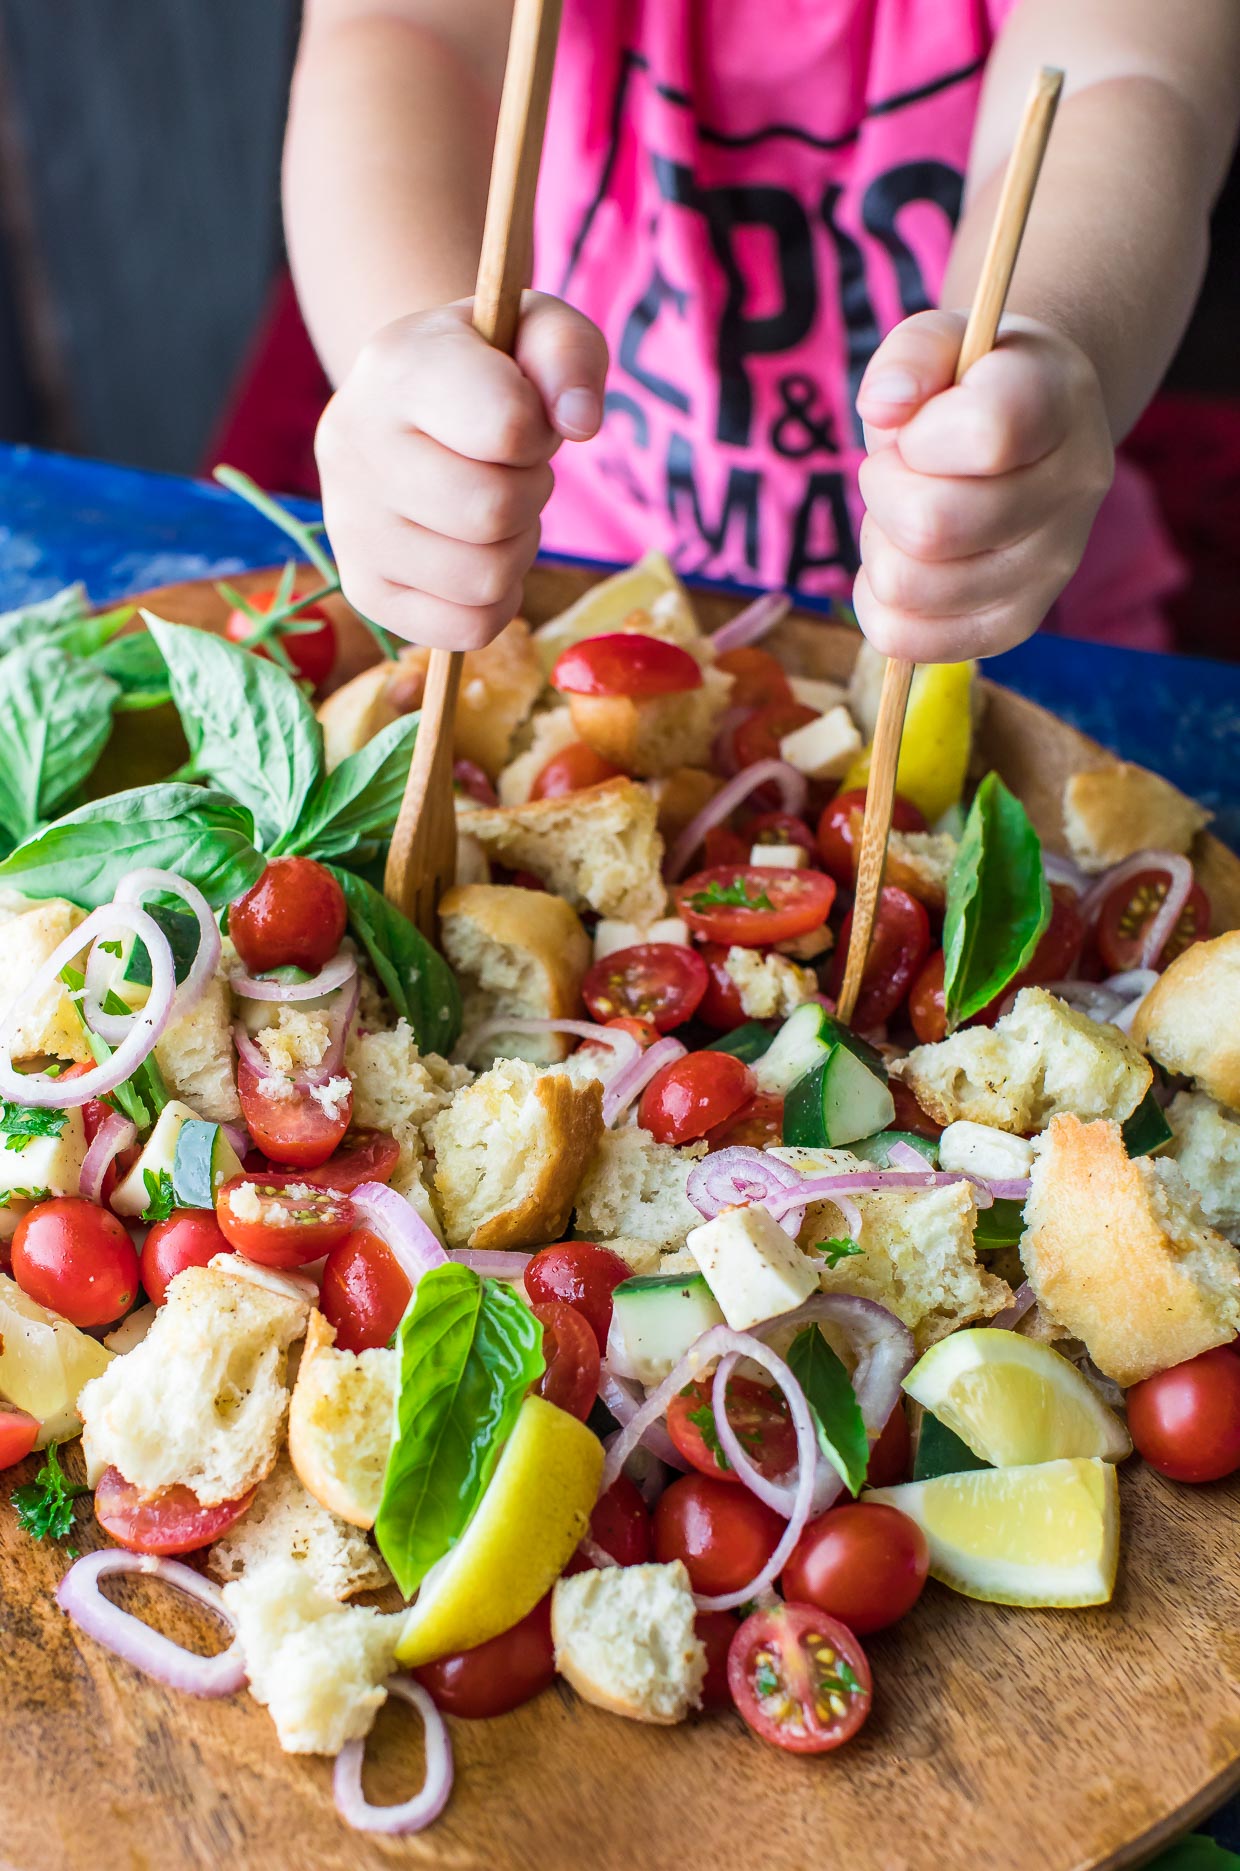 Classic Tomato Panzanella with a Caprese twist! This Tuscan bread salad is scrumptious and Summery, perfect for your next party or picnic!